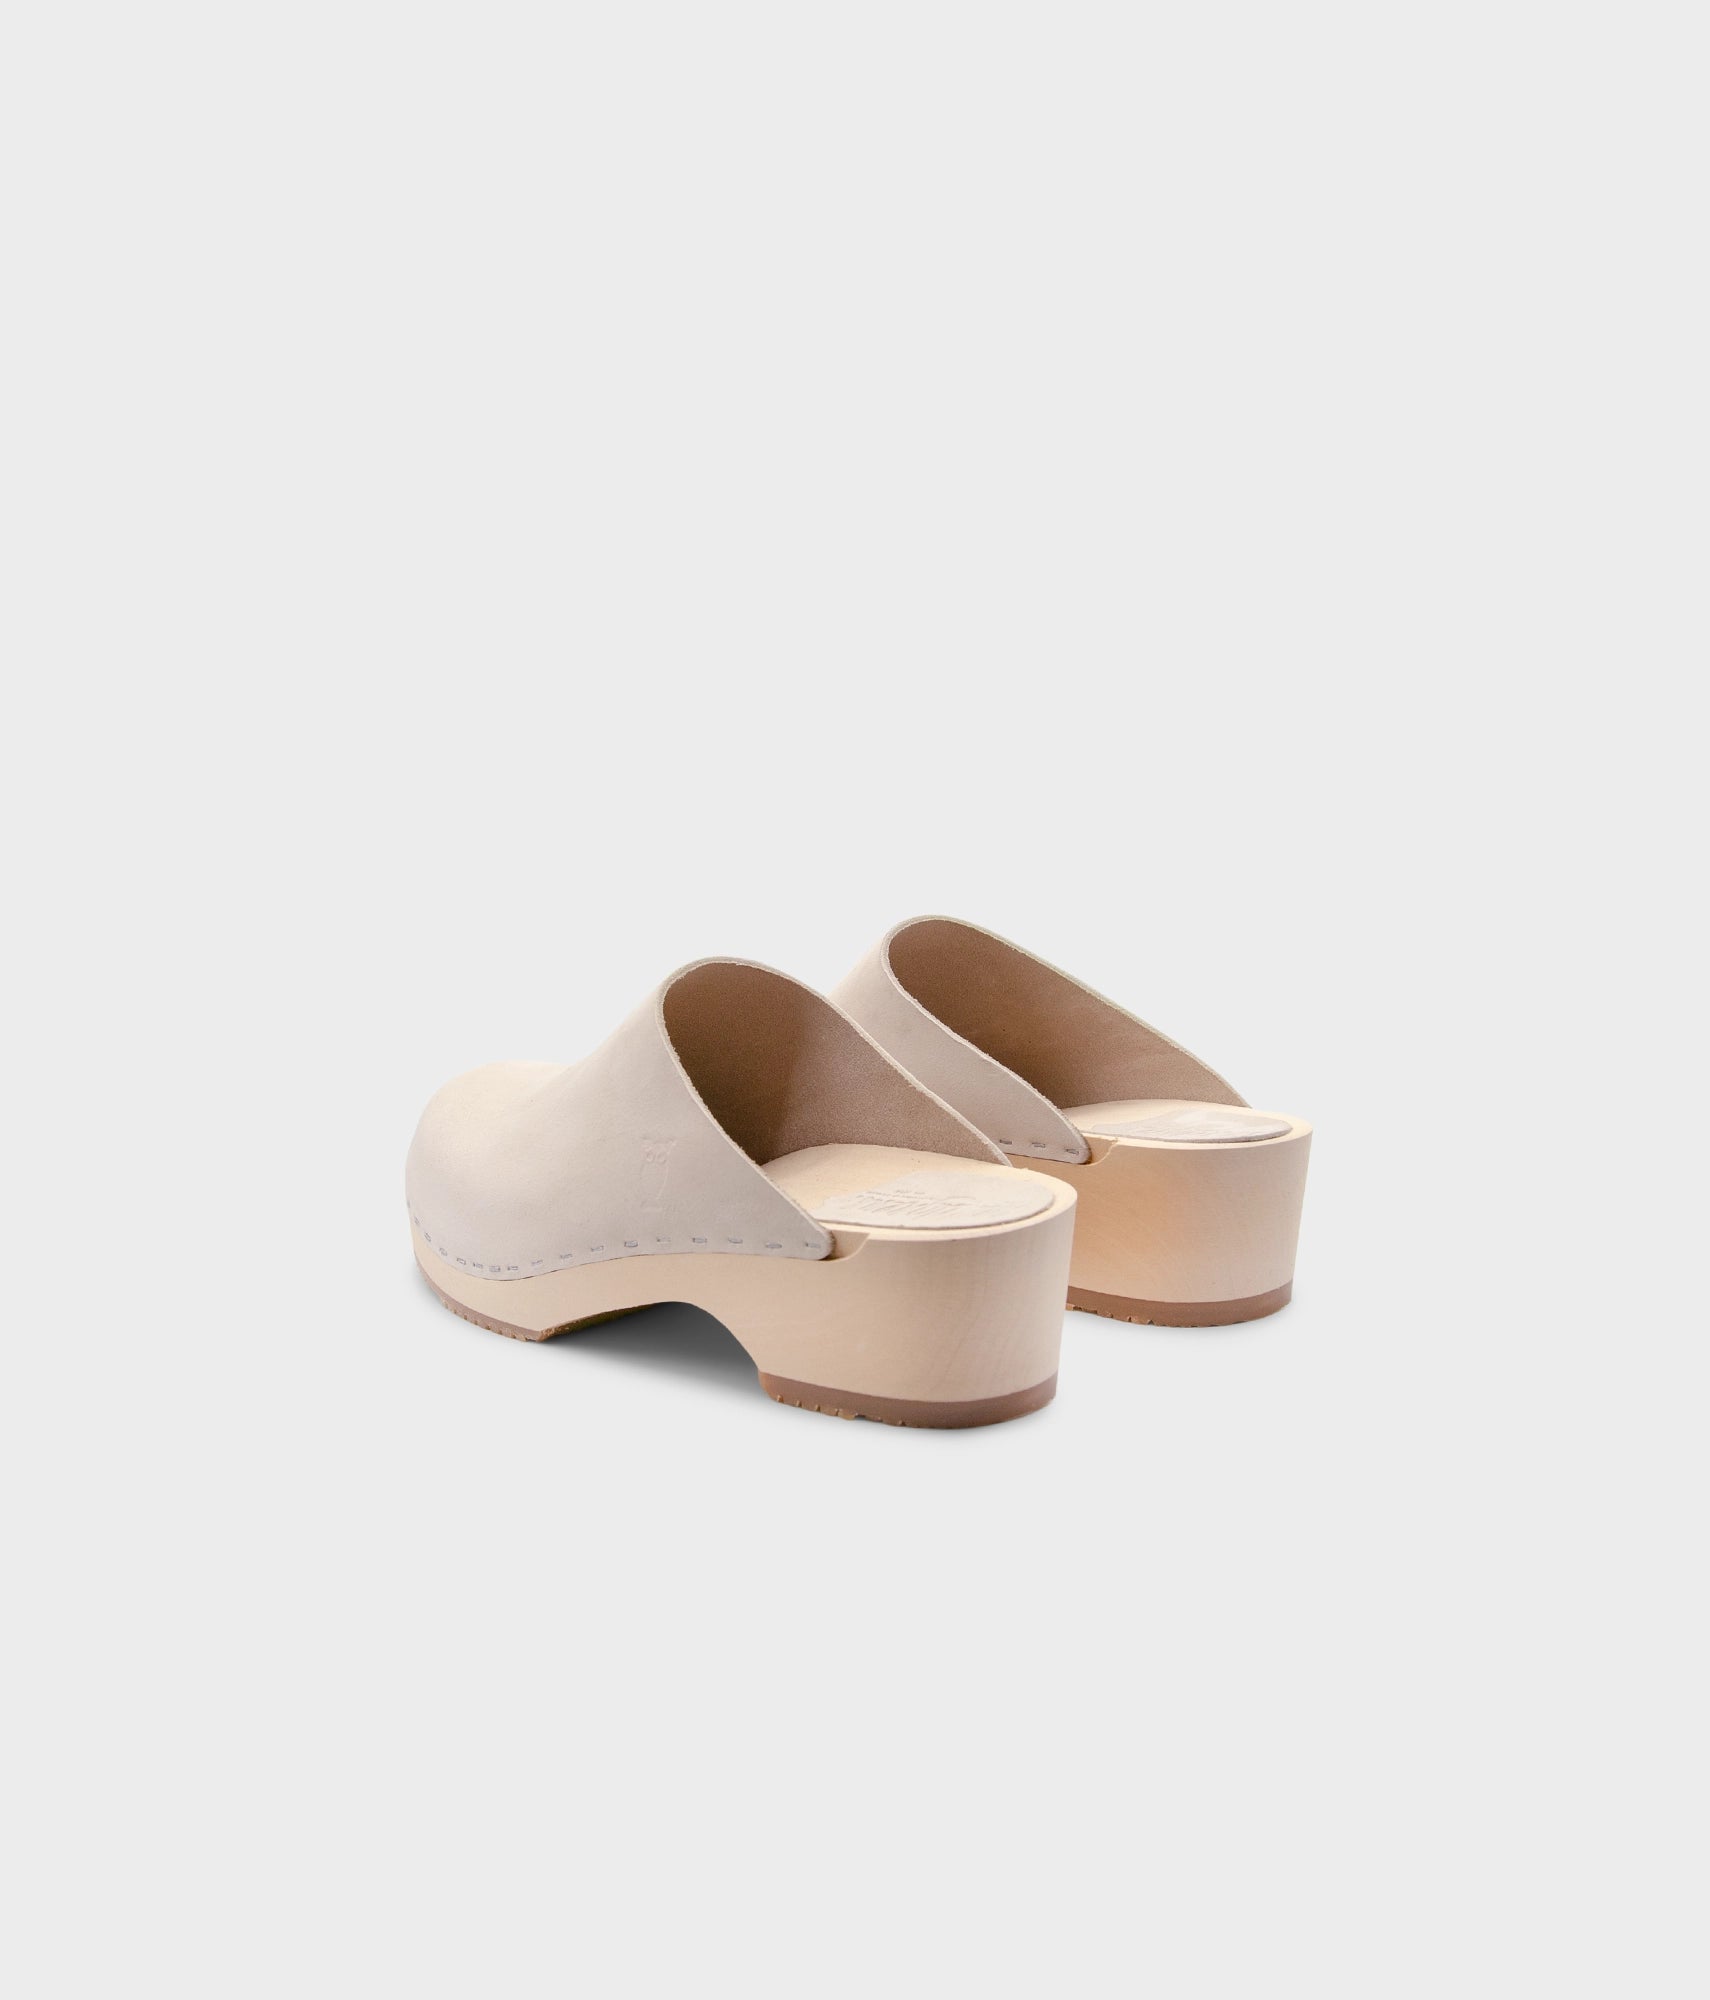 low heeled minimalistic clog mules in sand white nubuck leather stapled on a light wooden base